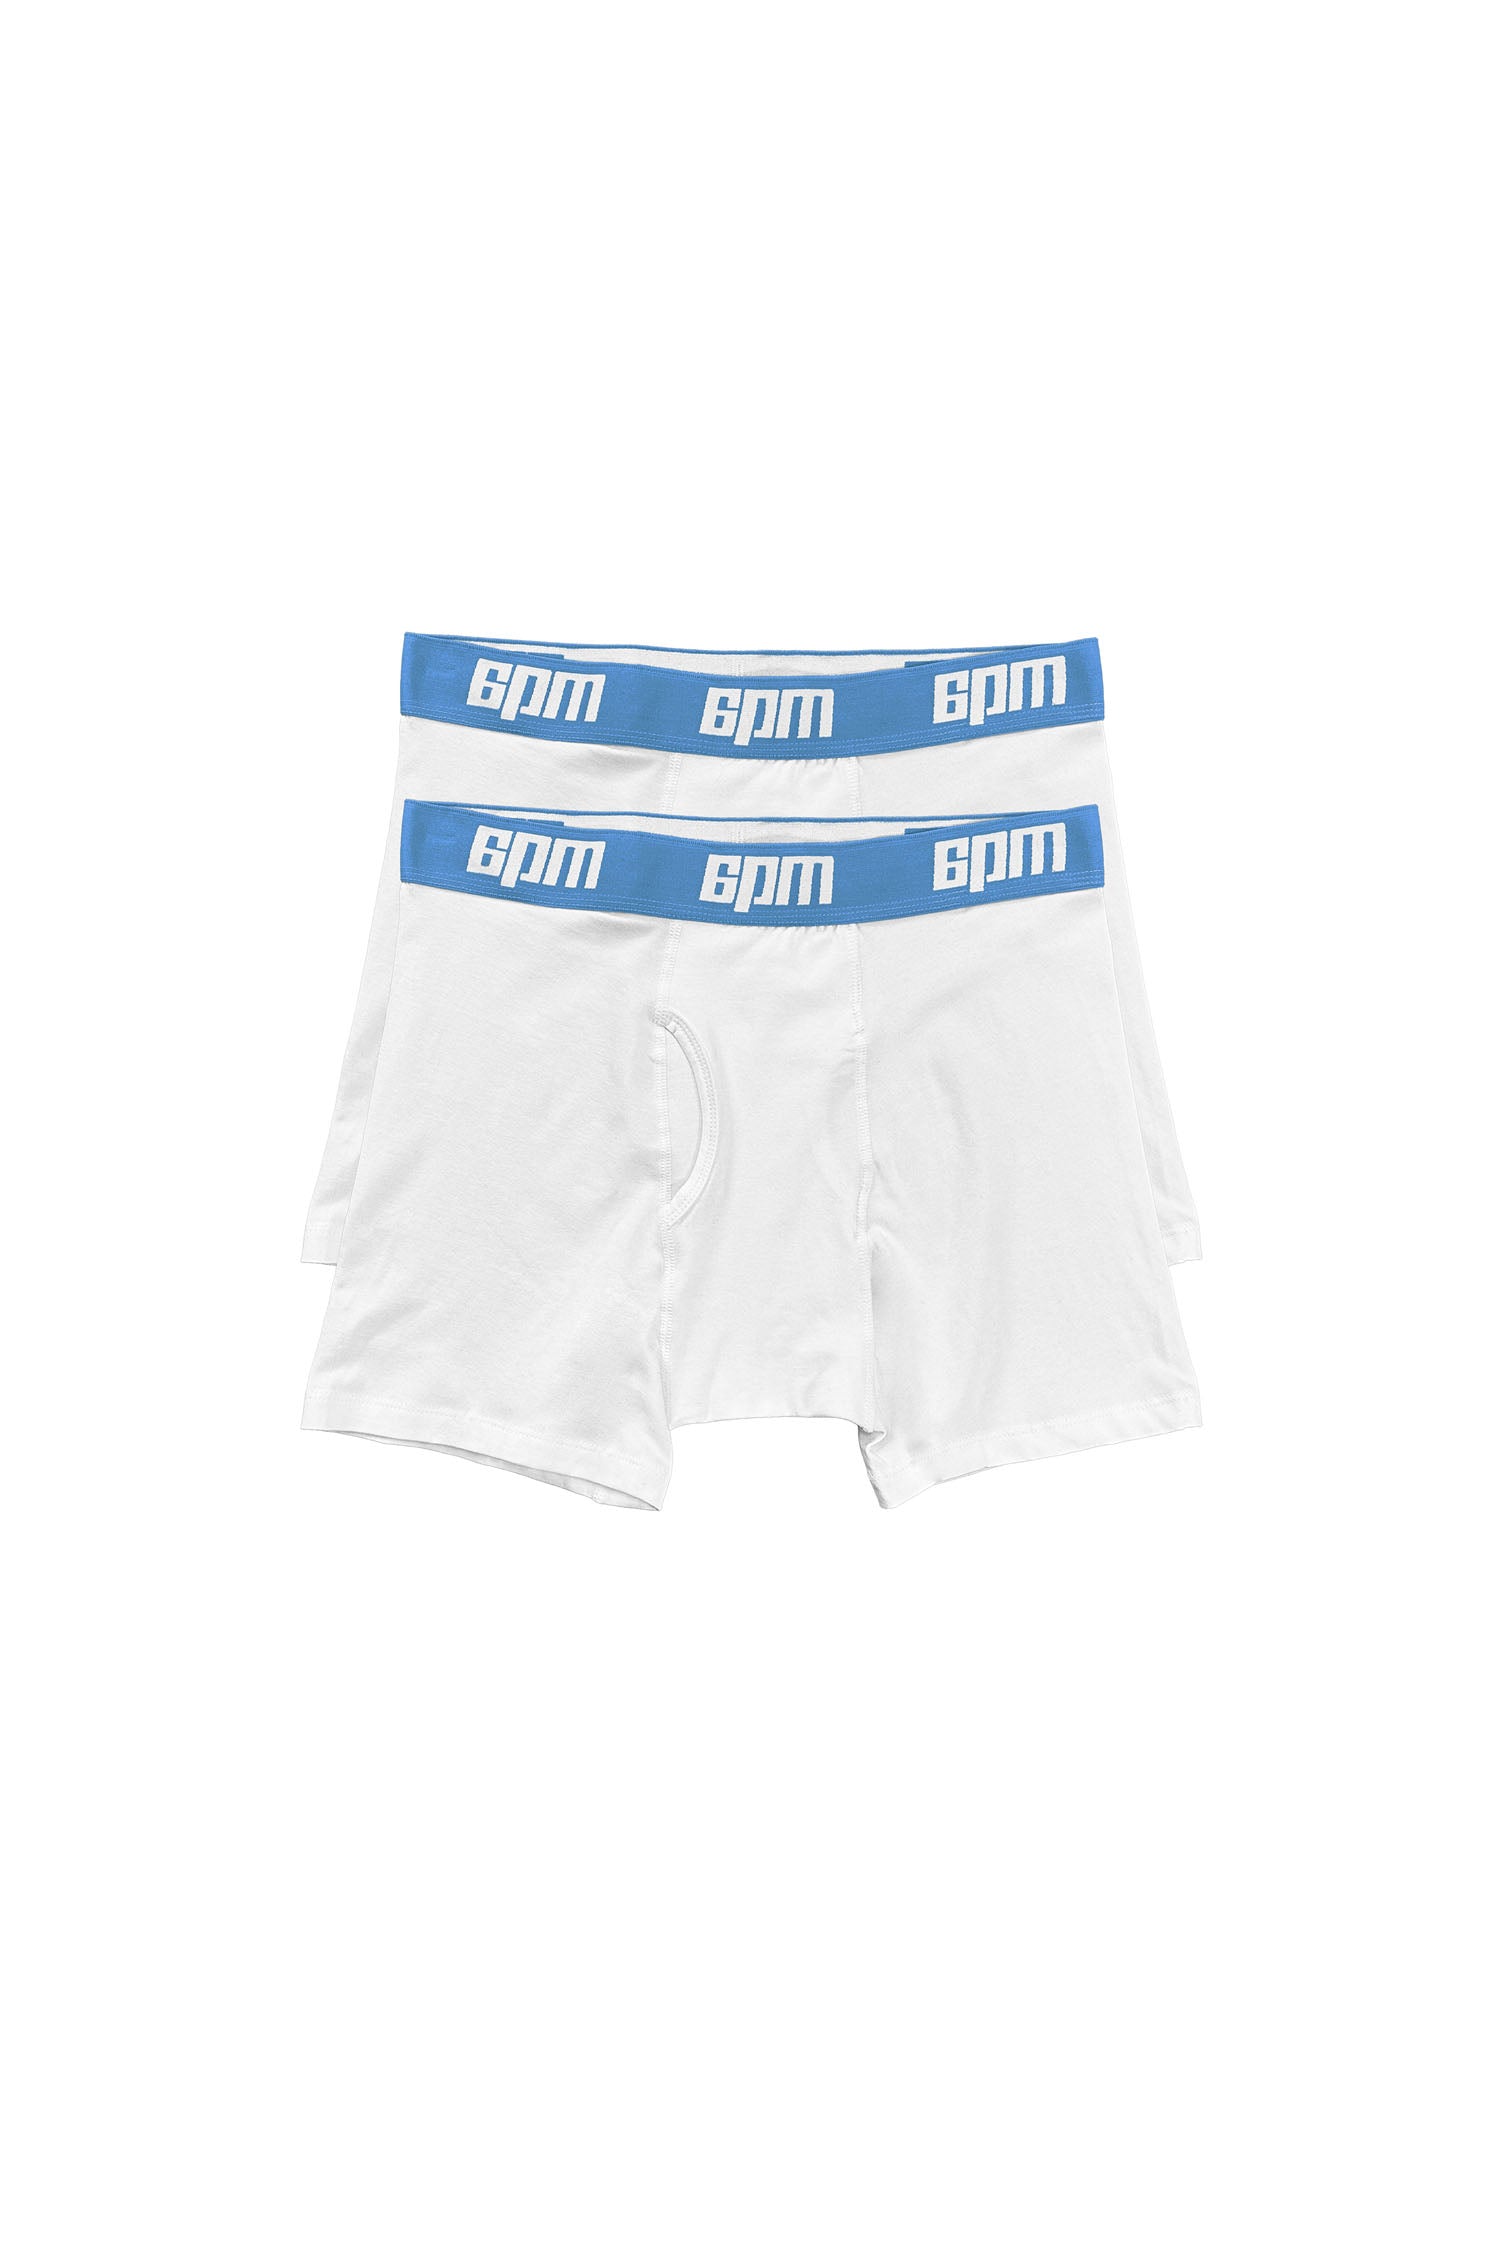 BOXER SHORTS WHITE/BABY BLUE (2-PACK)